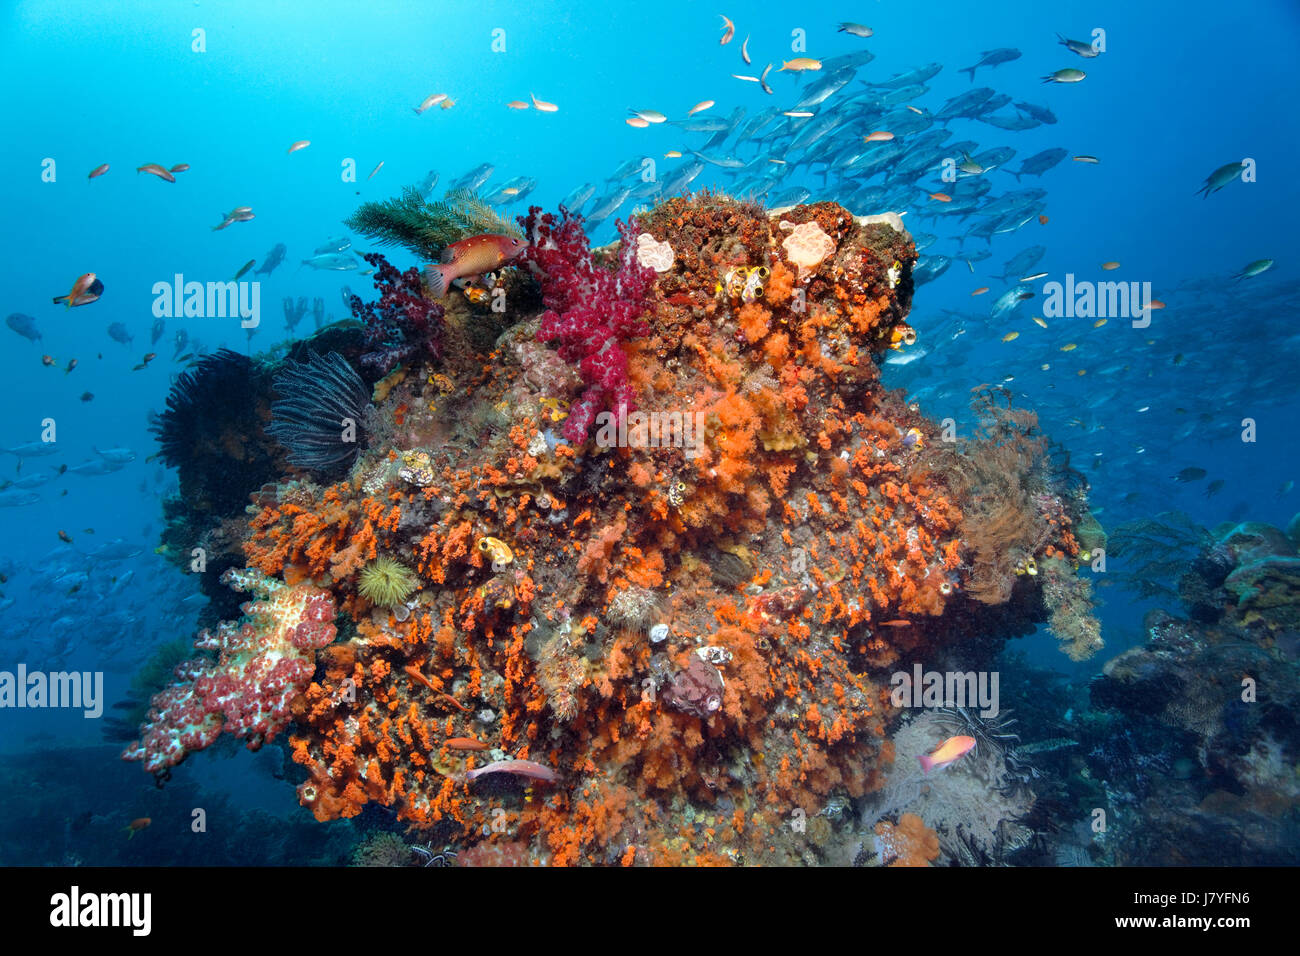 Underwater landscape with coral block densely covered with different soft corals, at back swarm bigeye trevallies (Caranx Stock Photo